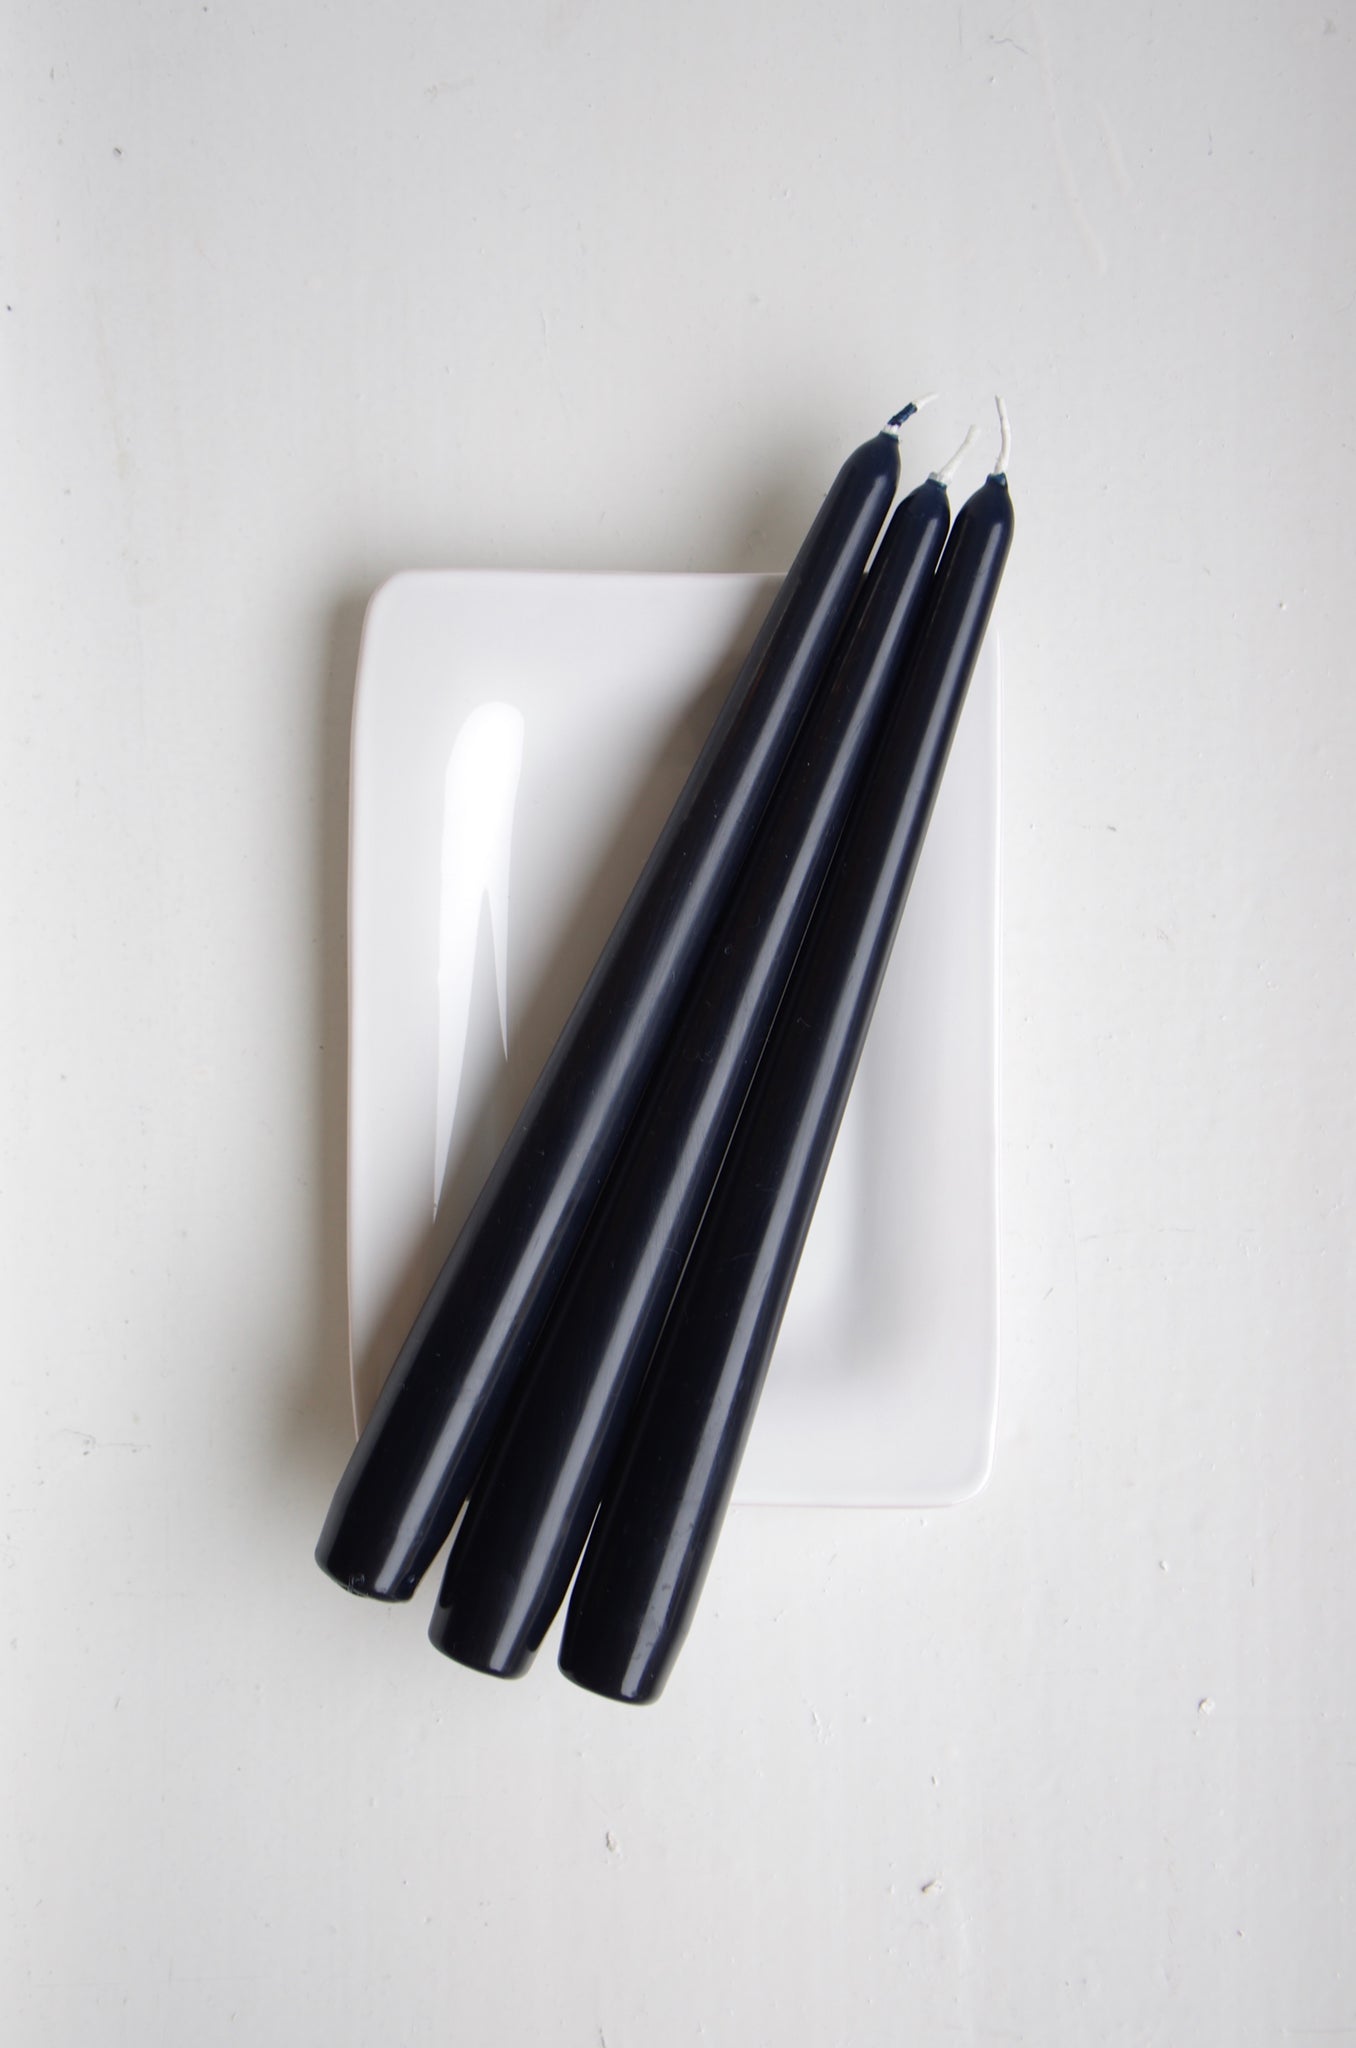 Tapered candles, cool black, set of 3